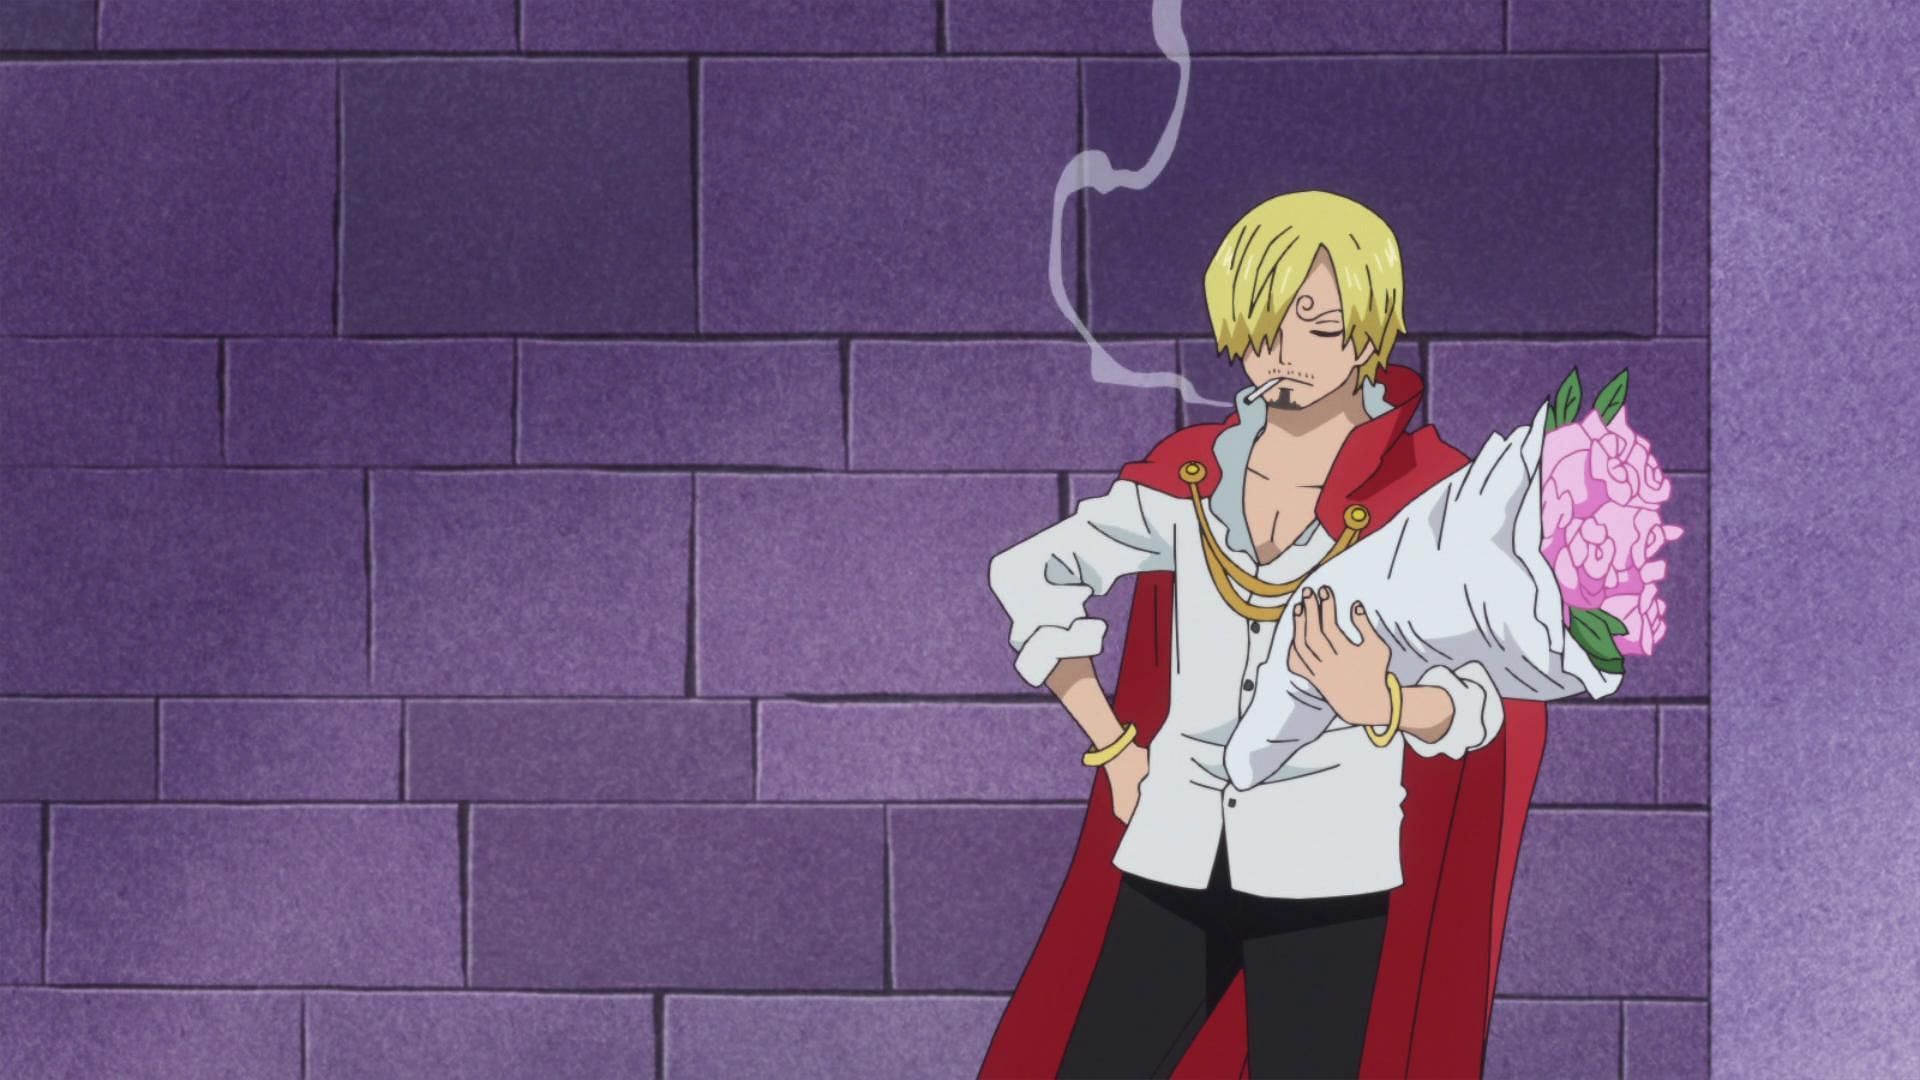 Chivalry is one of Sanji